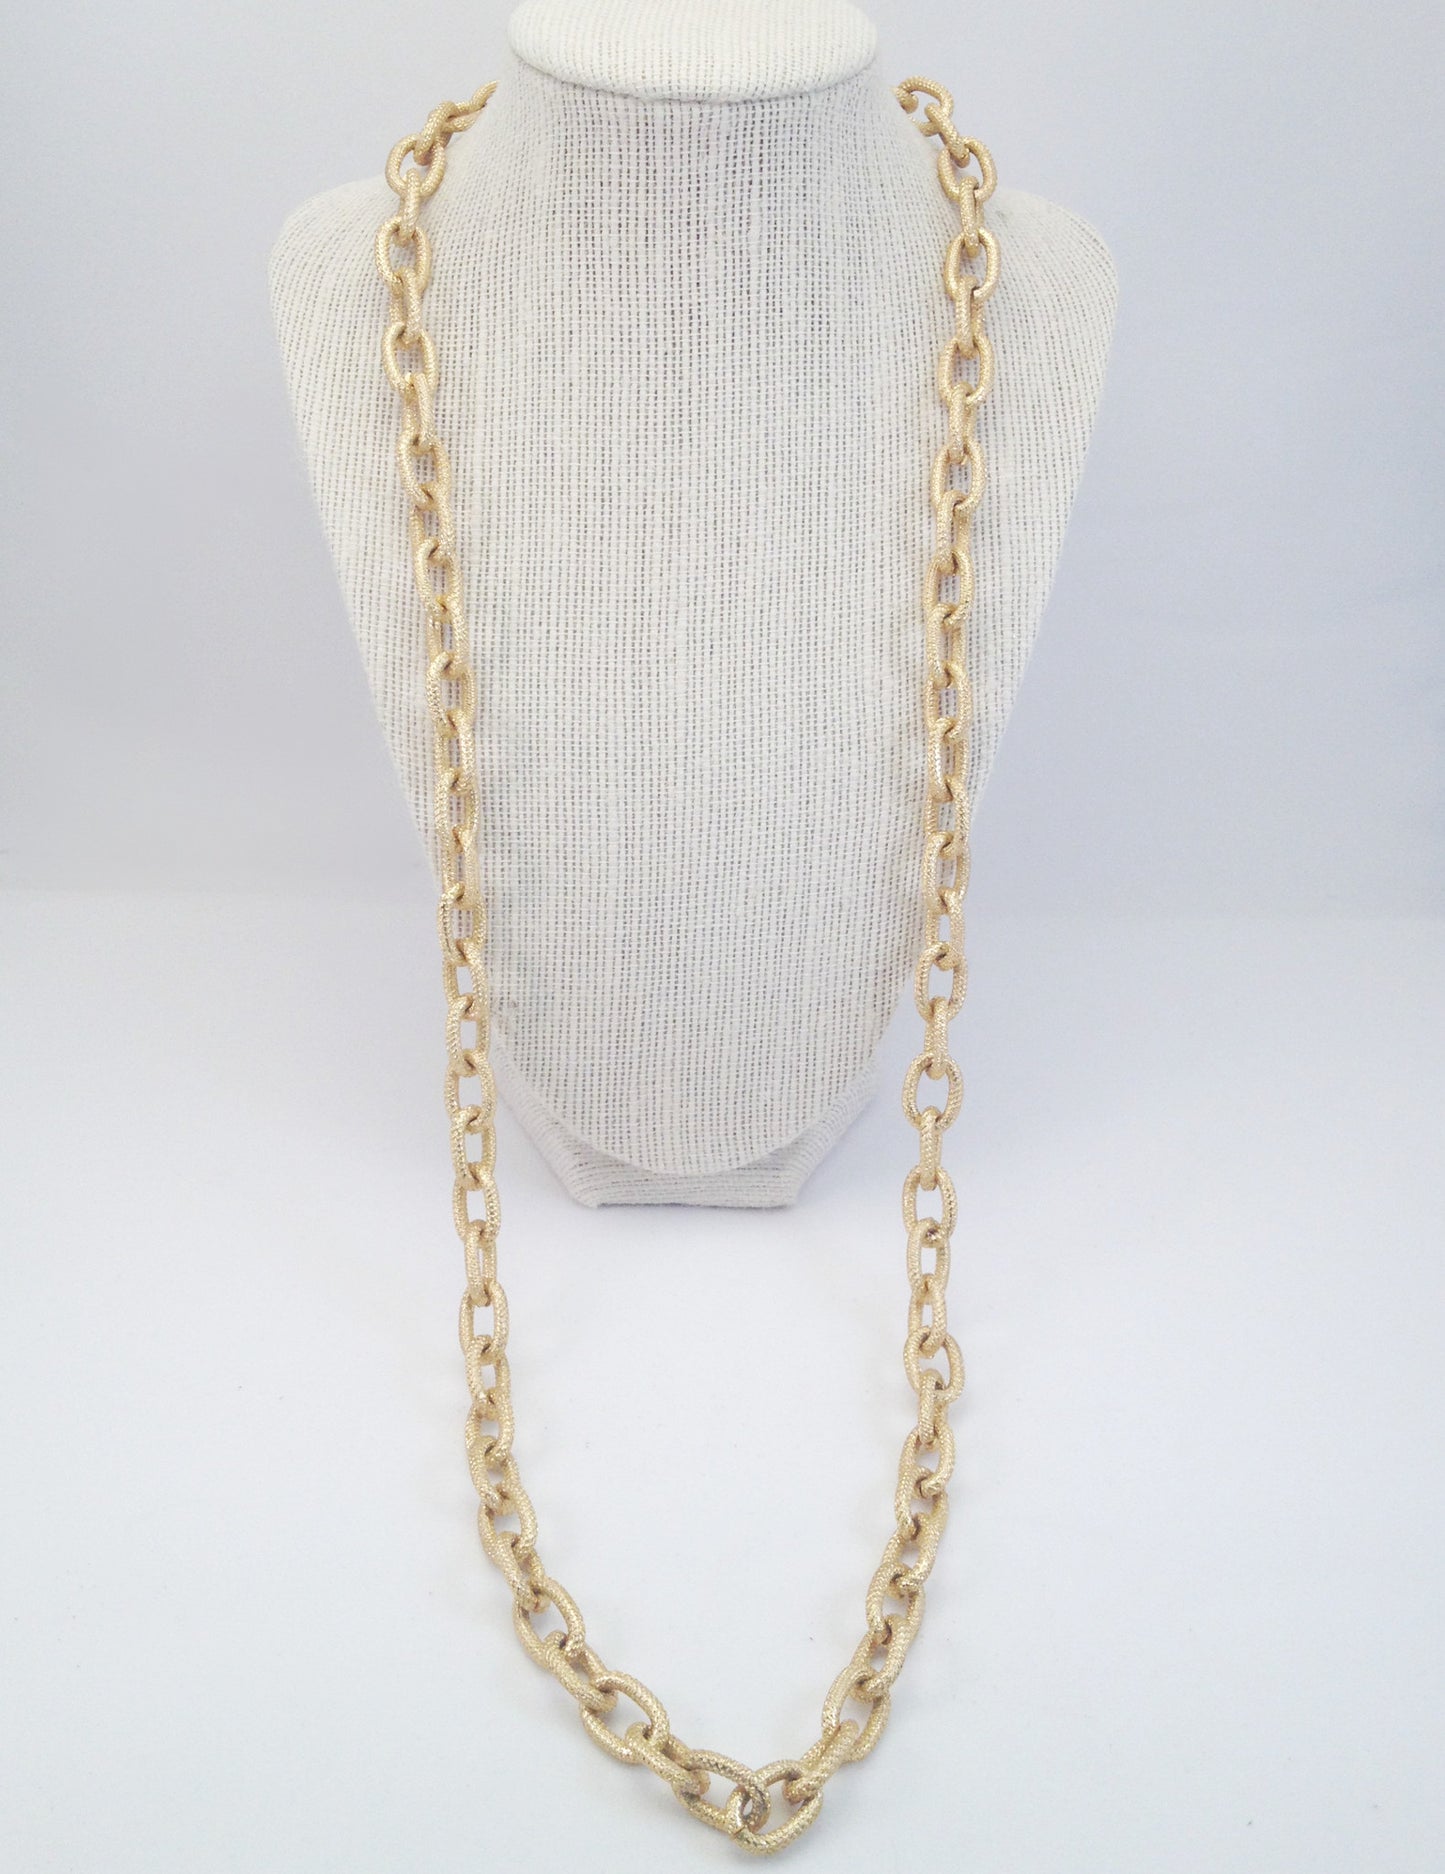 chain loop necklace, textured